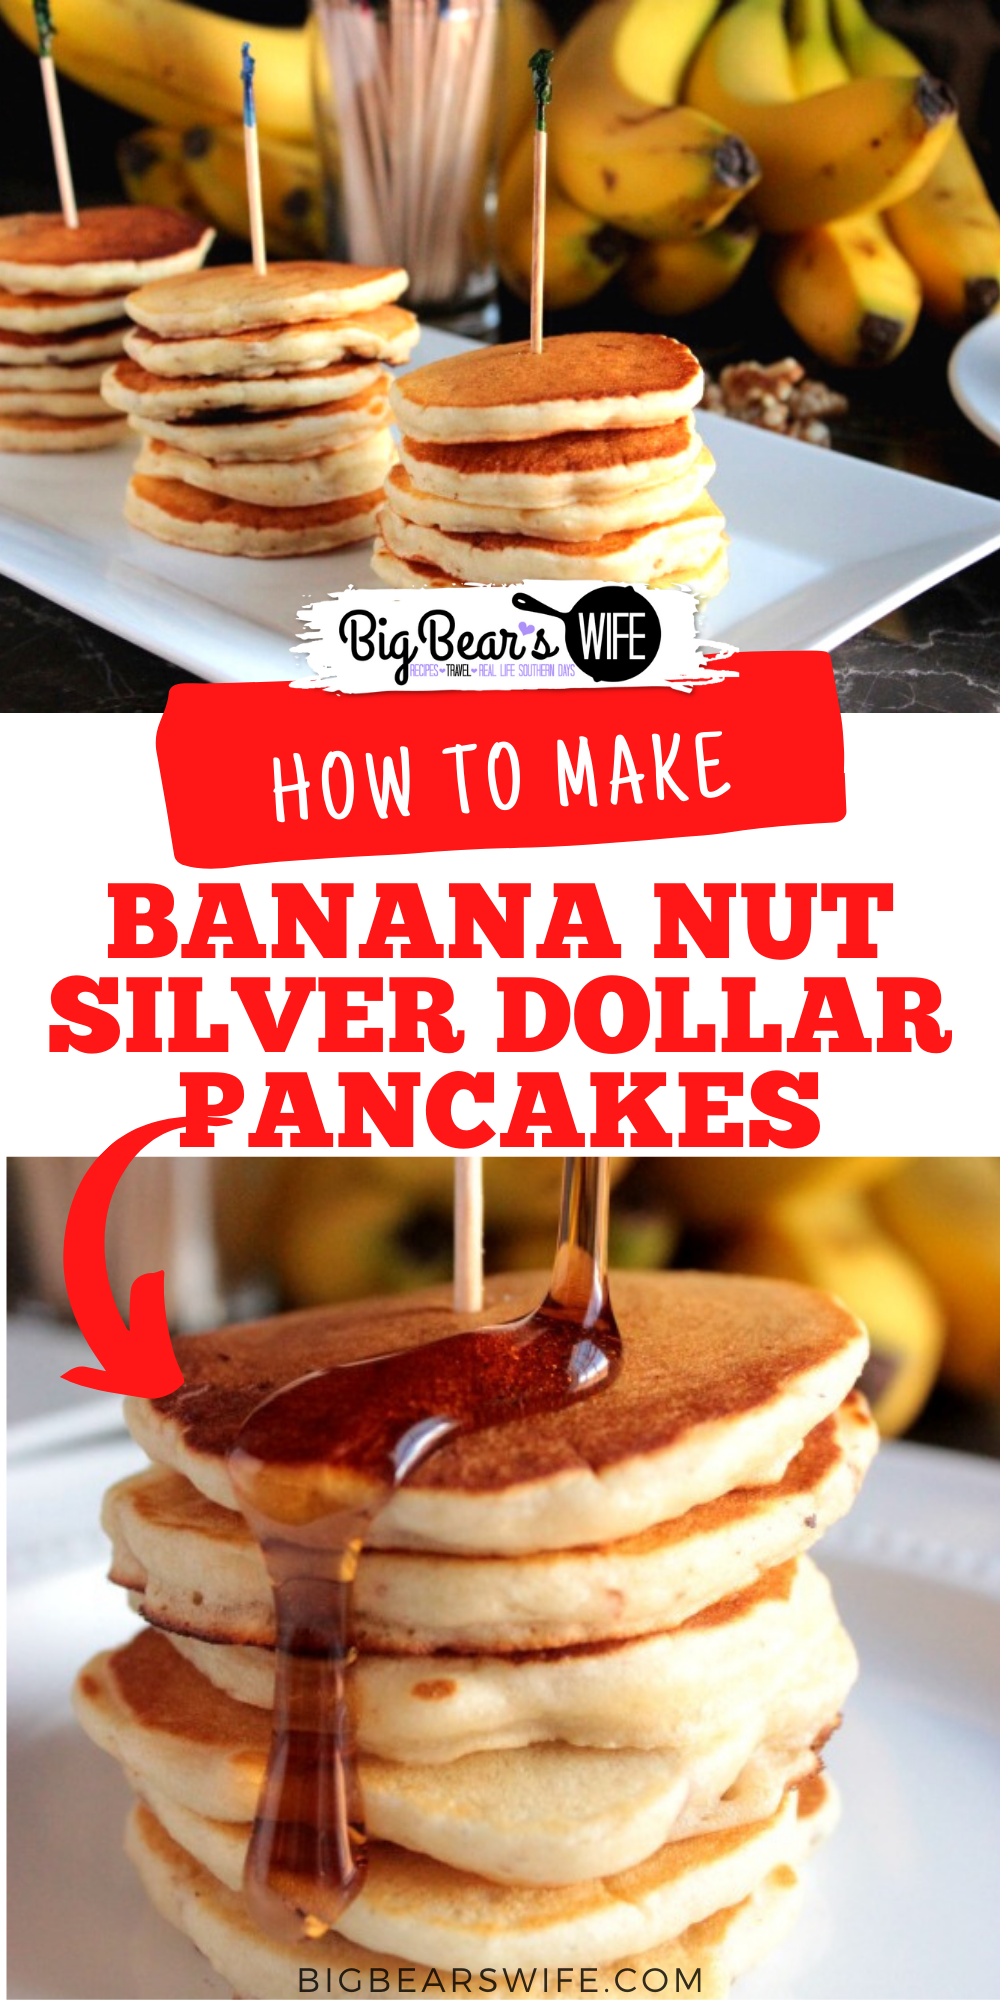 BANANA NUT SILVER DOLLAR PANCAKES - Delicious and wonderful banana pancakes that can be cooked regular size or mini size! They're perfect for breakfast!  via @bigbearswife